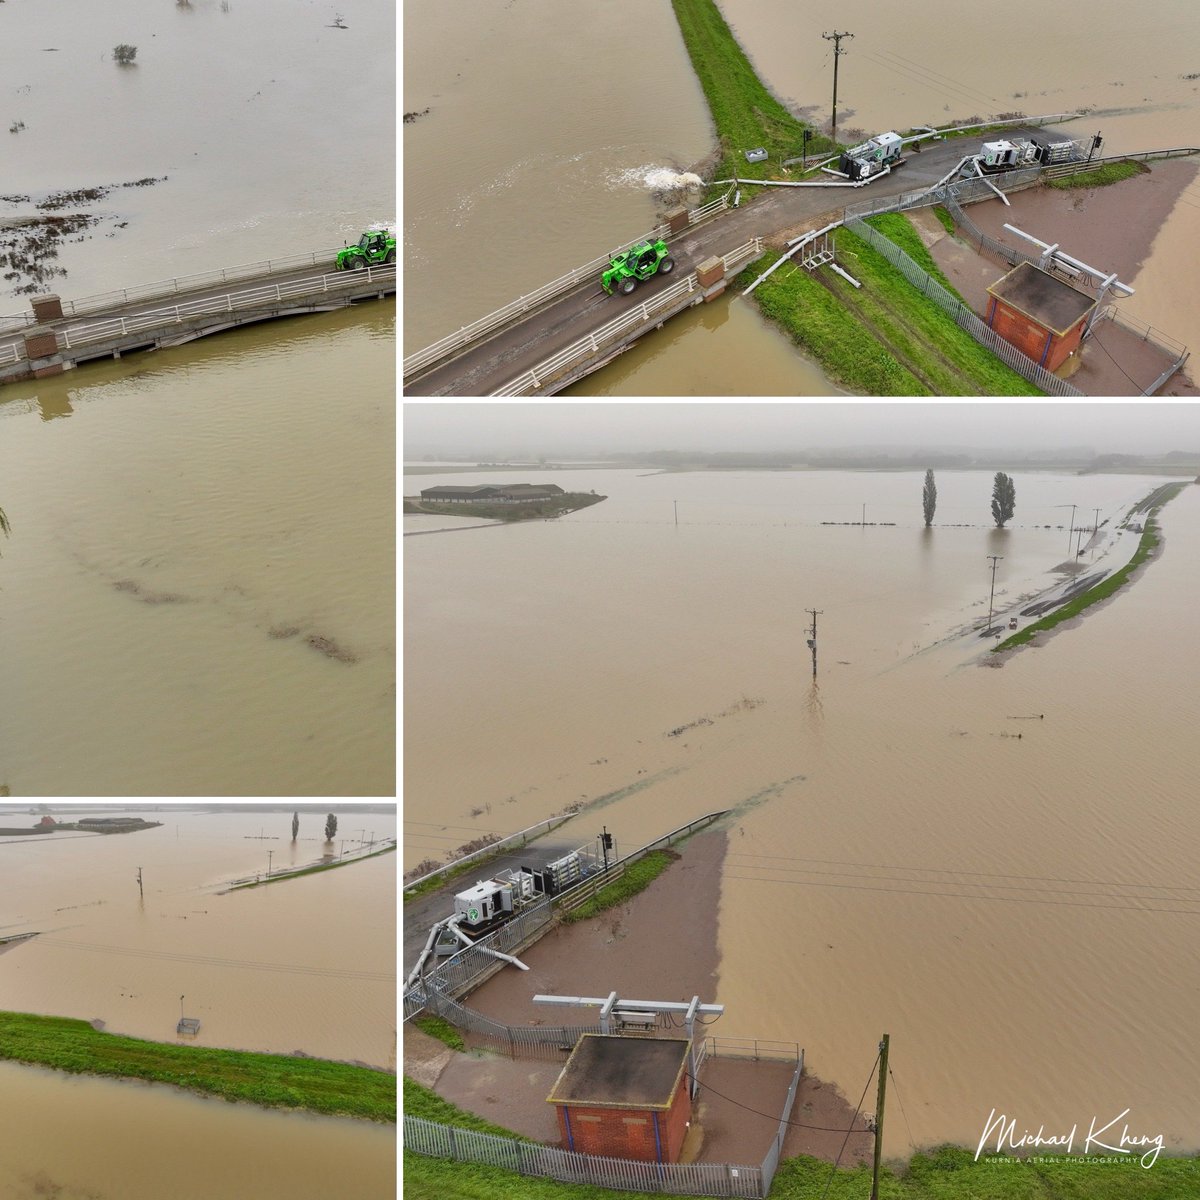 Farmland in Short Ferry, Lincolnshire under water again. This is not flood land and the farmer does not receive compensation. The road is also closed. 🎥🎬
#StormBabet
#thedroneman  #kurniaaerialphotography #DroneProduction #AerialProduction #DroneVideography #AerialFilming